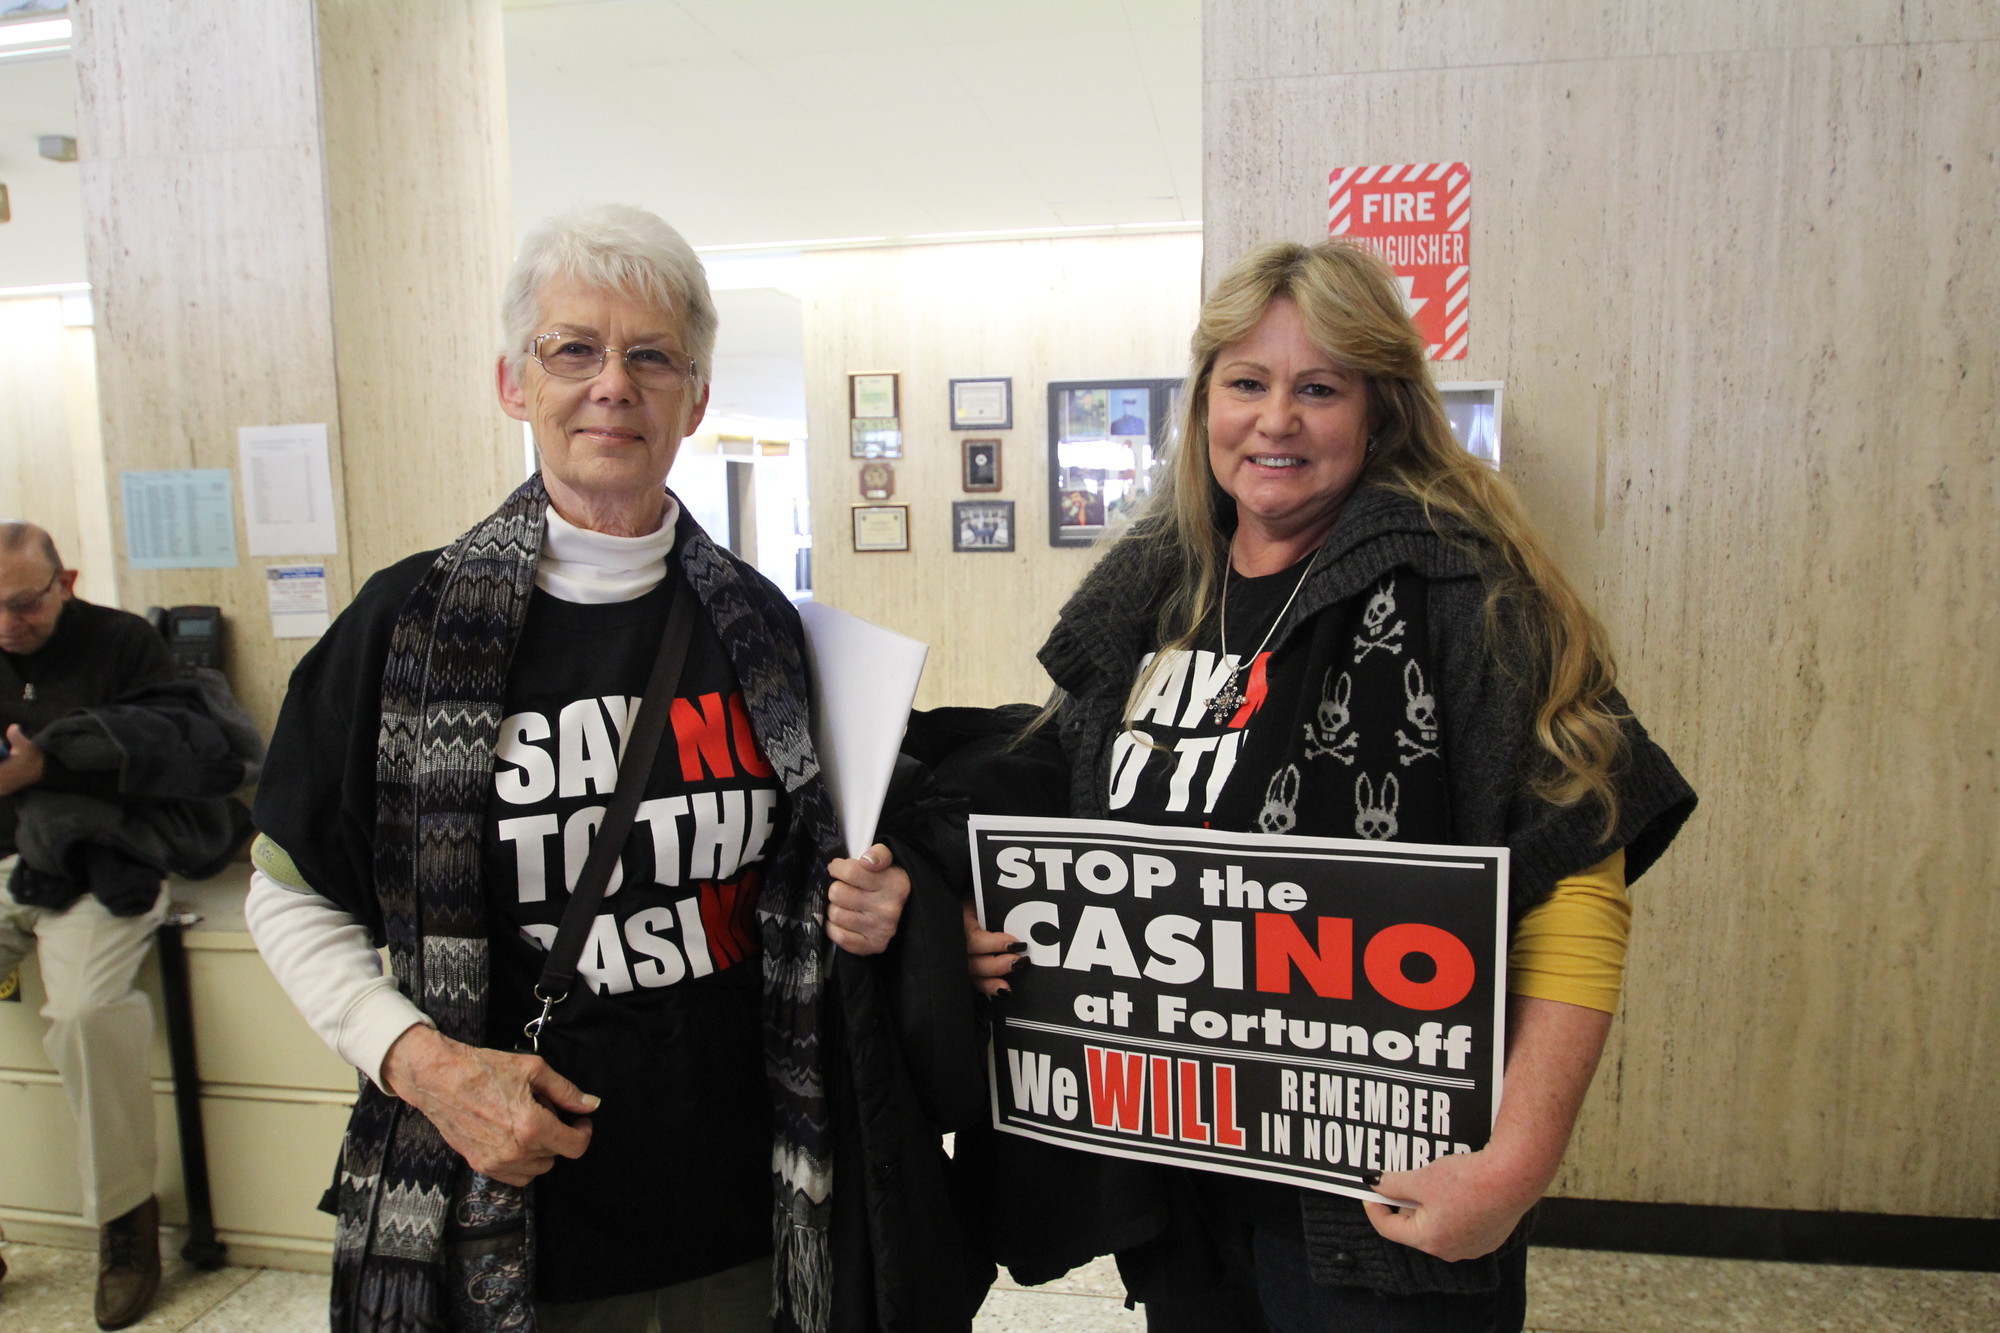 Carolyne Tompkins and Cynthia Latorre, who live in the Westbury/Carle Place School District, have attended every meeting and voiced their opposition to the proposed gaming facility at the Source Mall property.